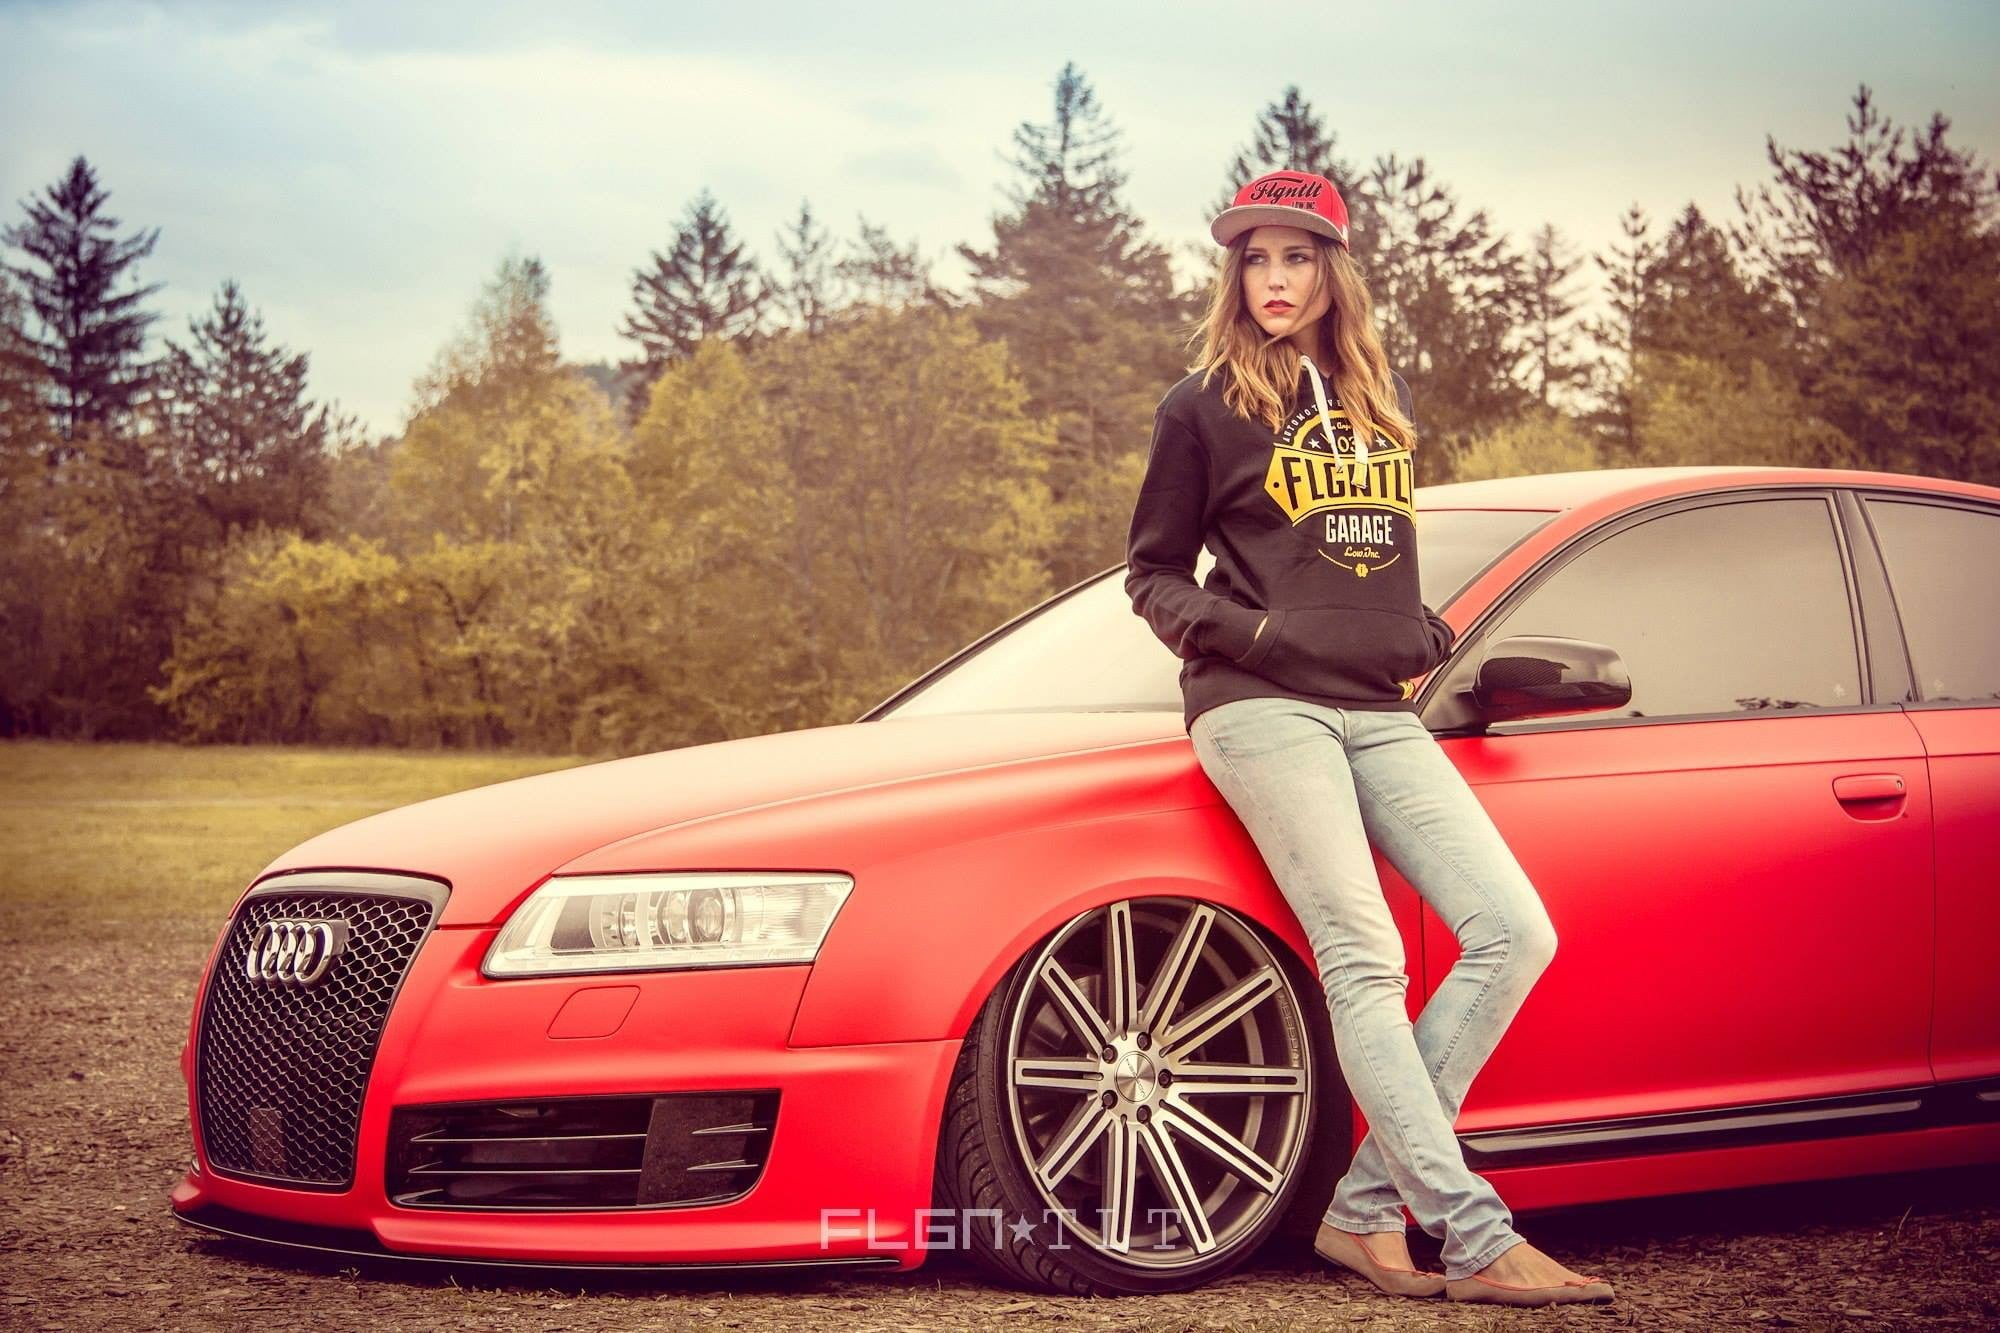 red Audi car, Audi A6, women with cars, red cars, baseball caps